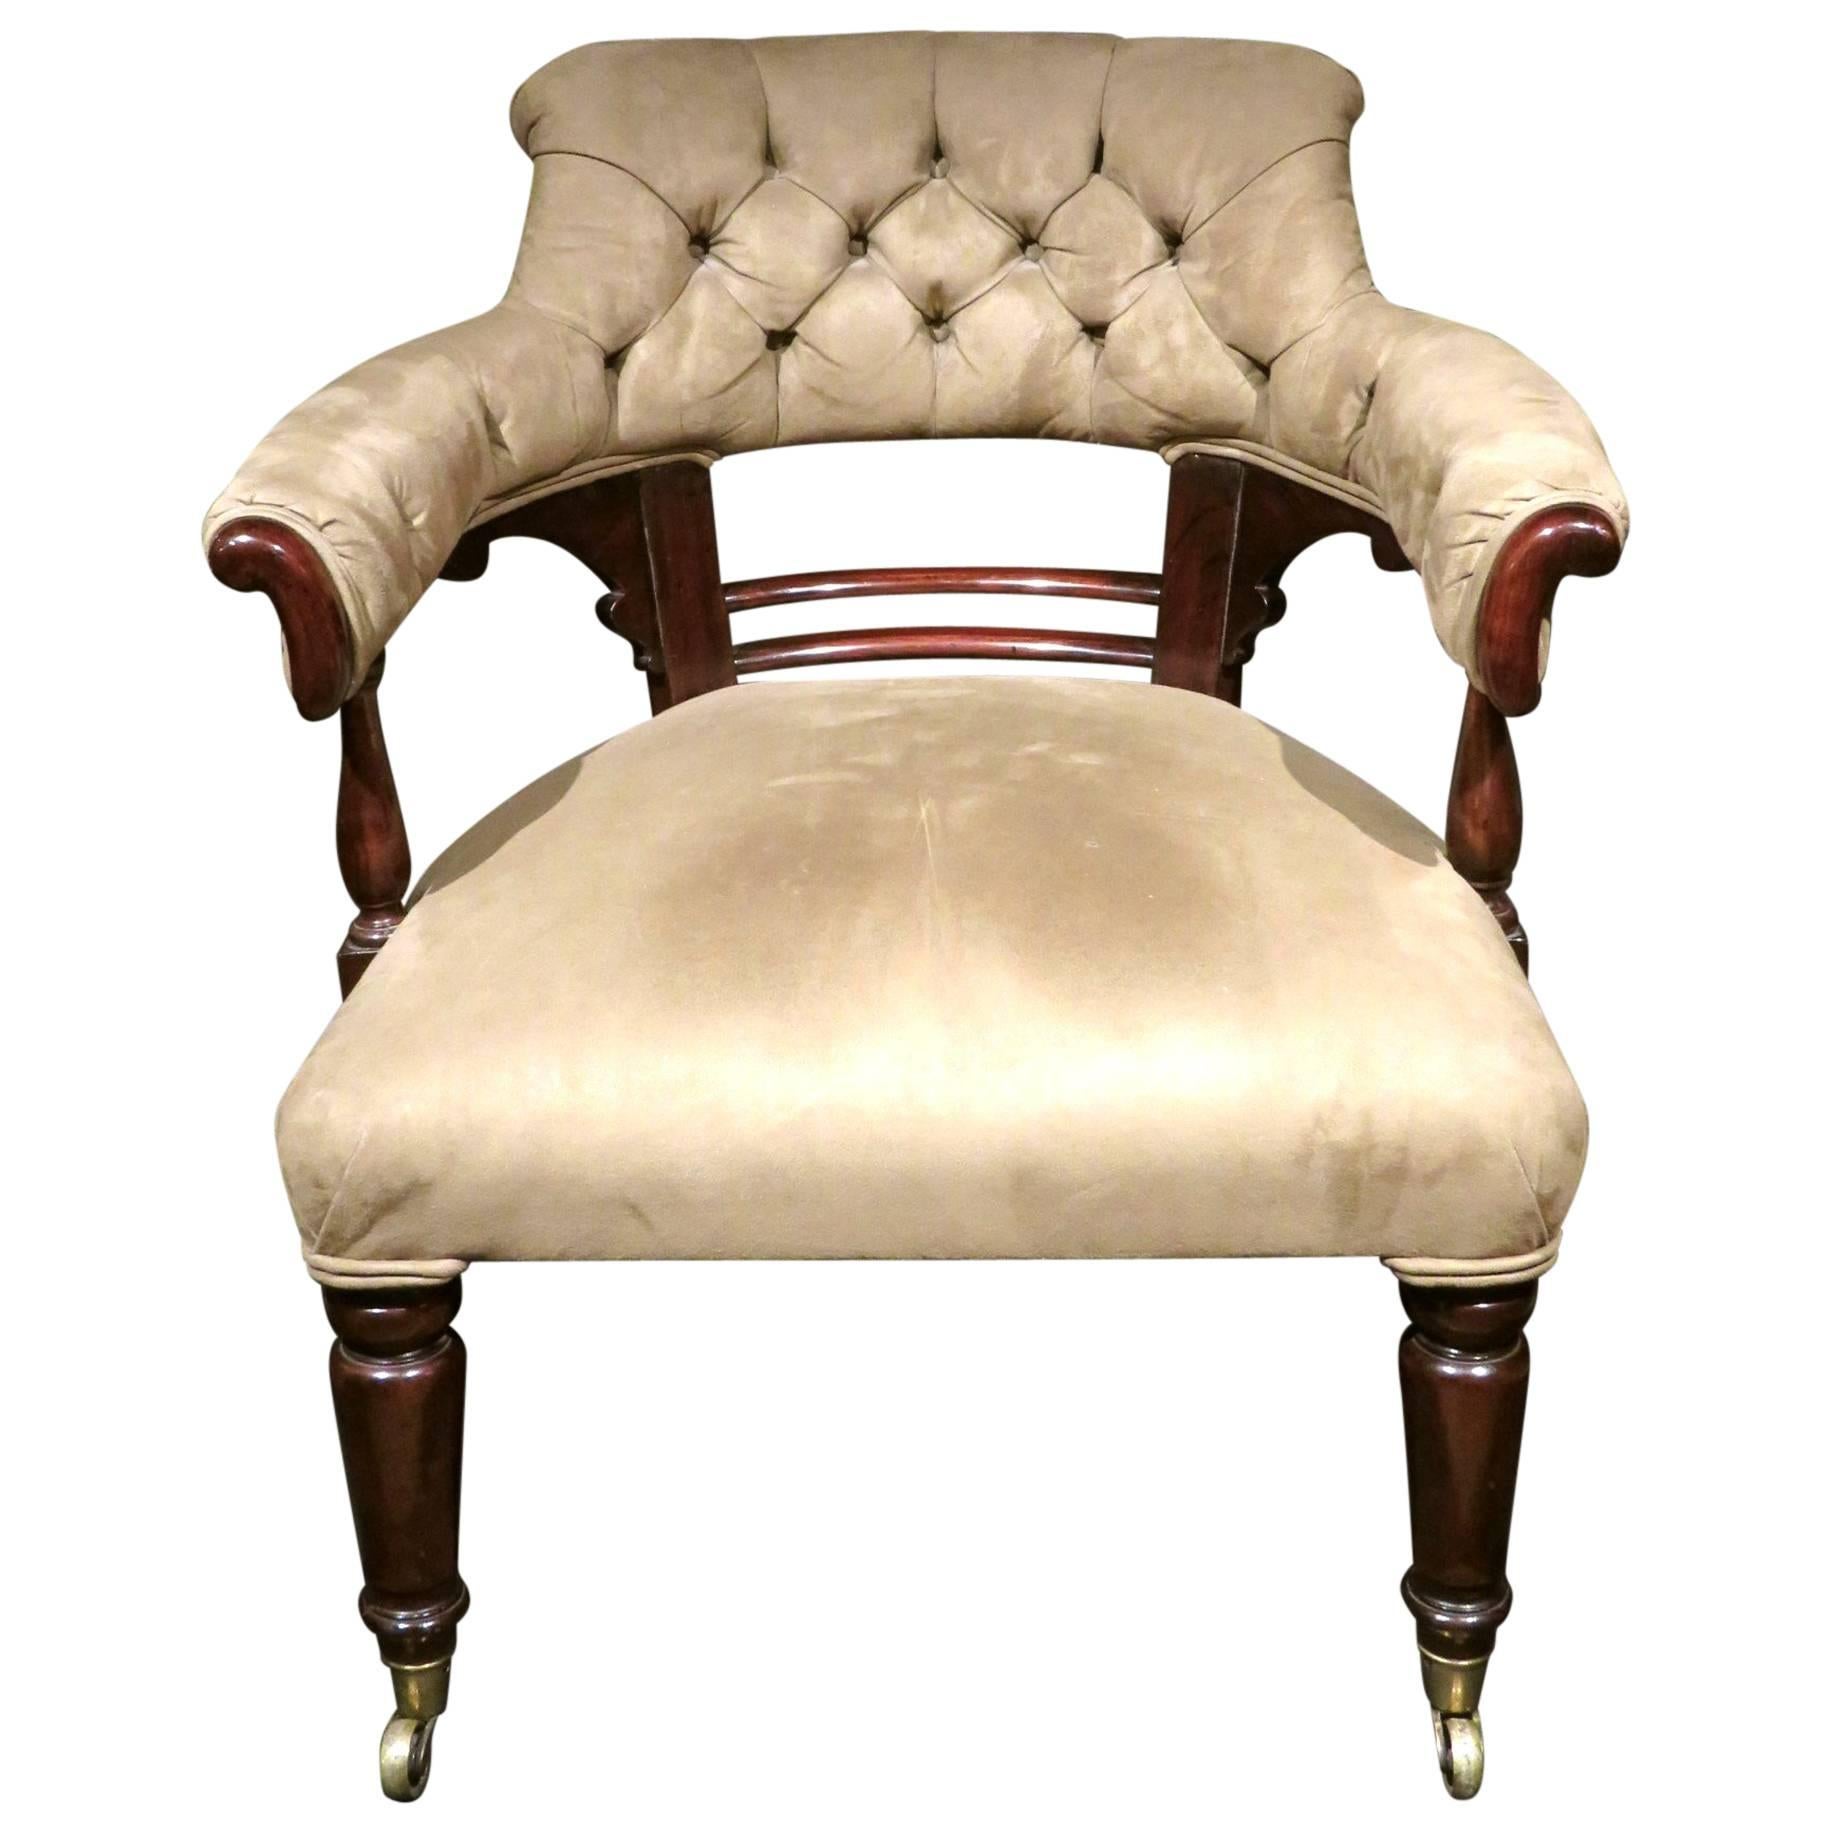 The mahogany frame showing a button tufted backrest and open armrests above a sprung seat, raised on turned front supports and splayed rear supports fitted with brass castors.
(Dear Client, please note we are in the process of finding a means to